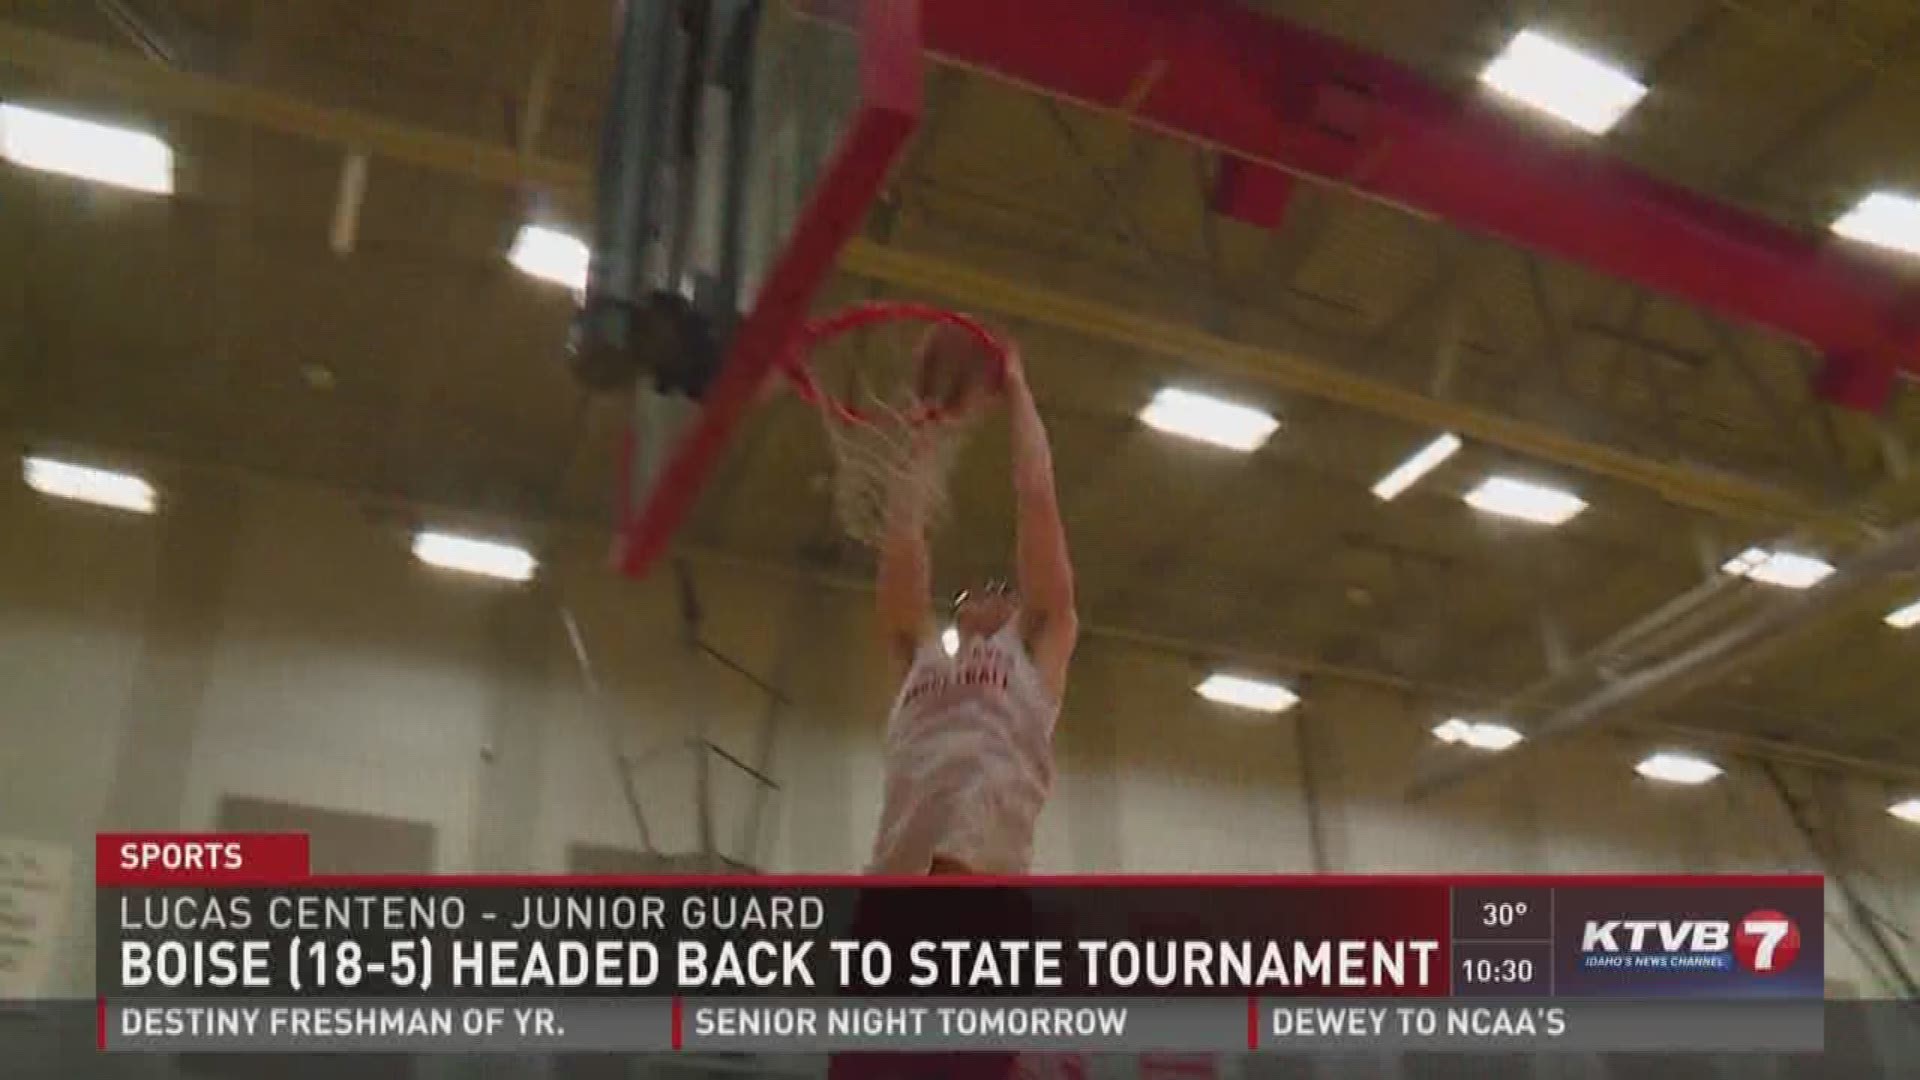 Boise headed to state for the first time since 1997 after a buzzer-beater against Borah in the district semi-finals. 